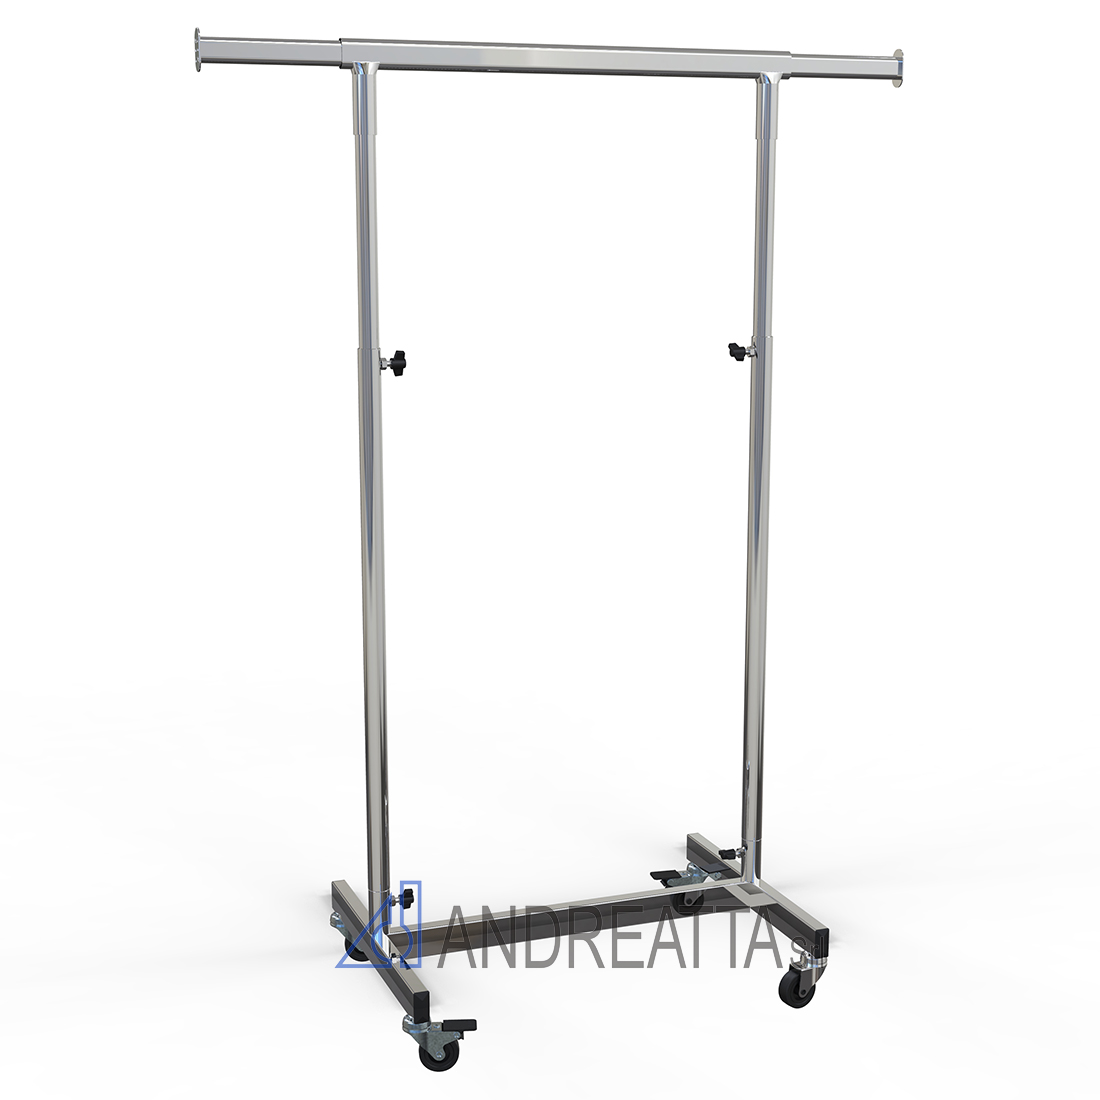 Small Garment rail Adjustable in height